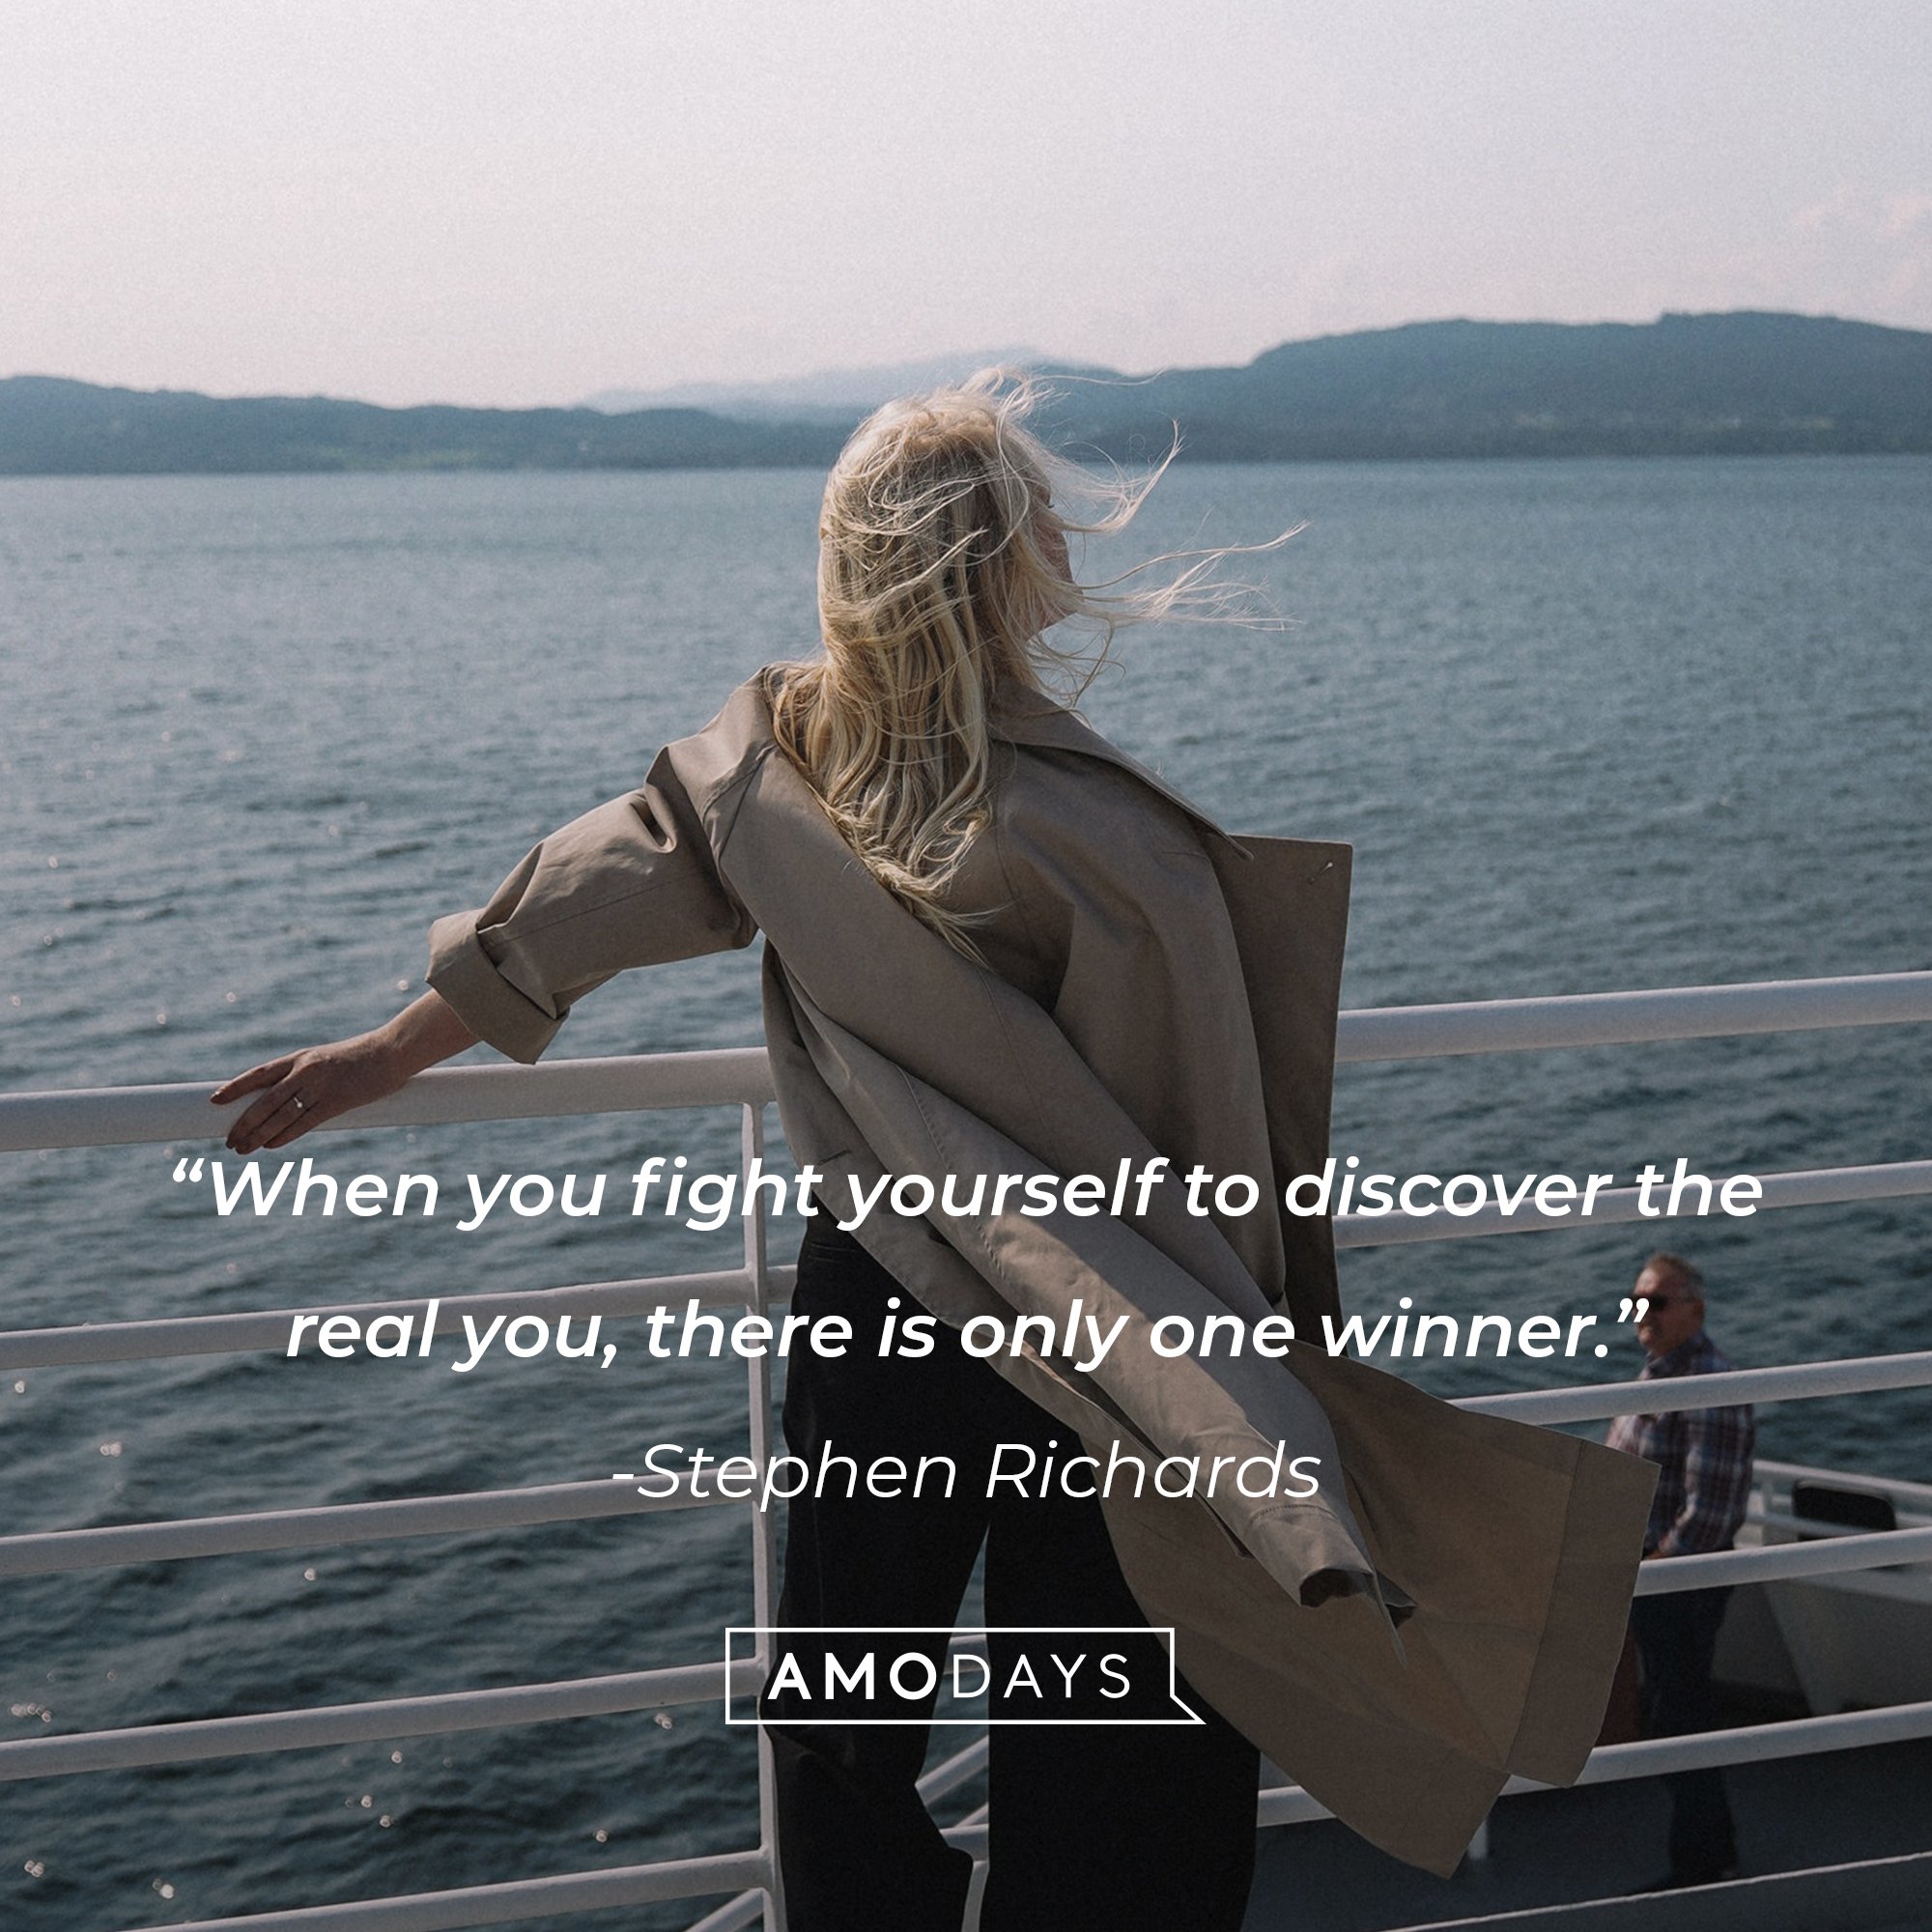 Stephen Richards's quote: “When you fight yourself to discover the real you, there is only one winner .” | Image: AmoDays